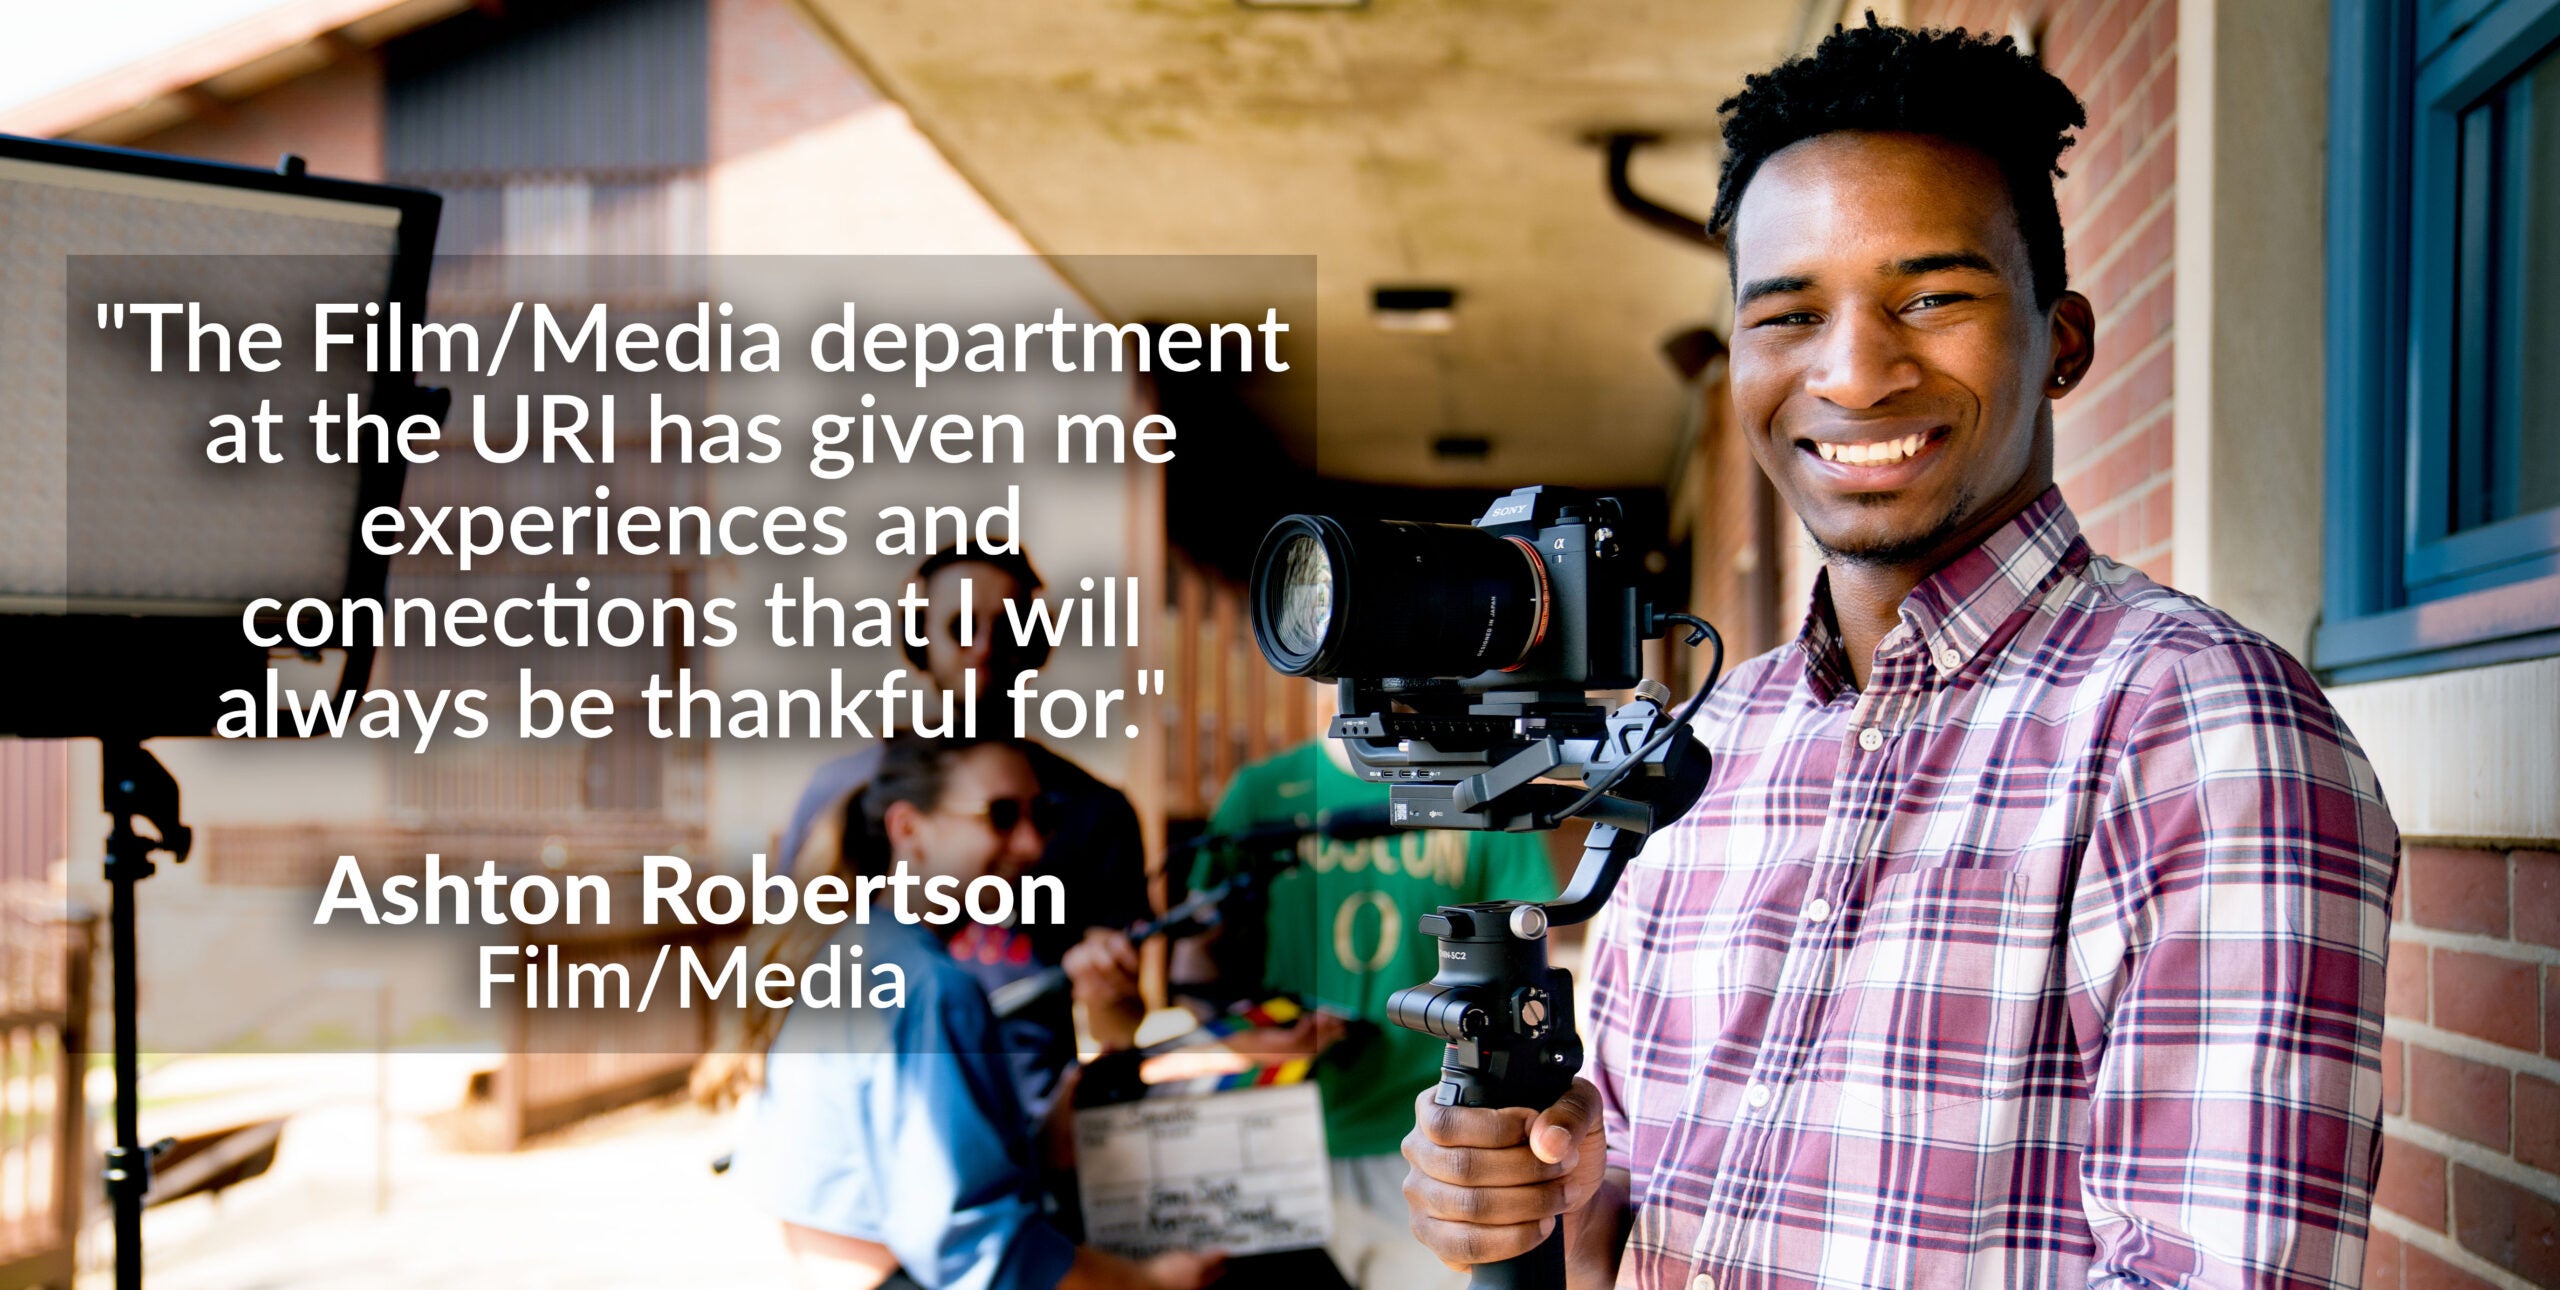 Photo of Ashton Robertson a Film/Media Student with quote "The Film/Media department at the URI has given me experiences and connections that I will always be thankful for."